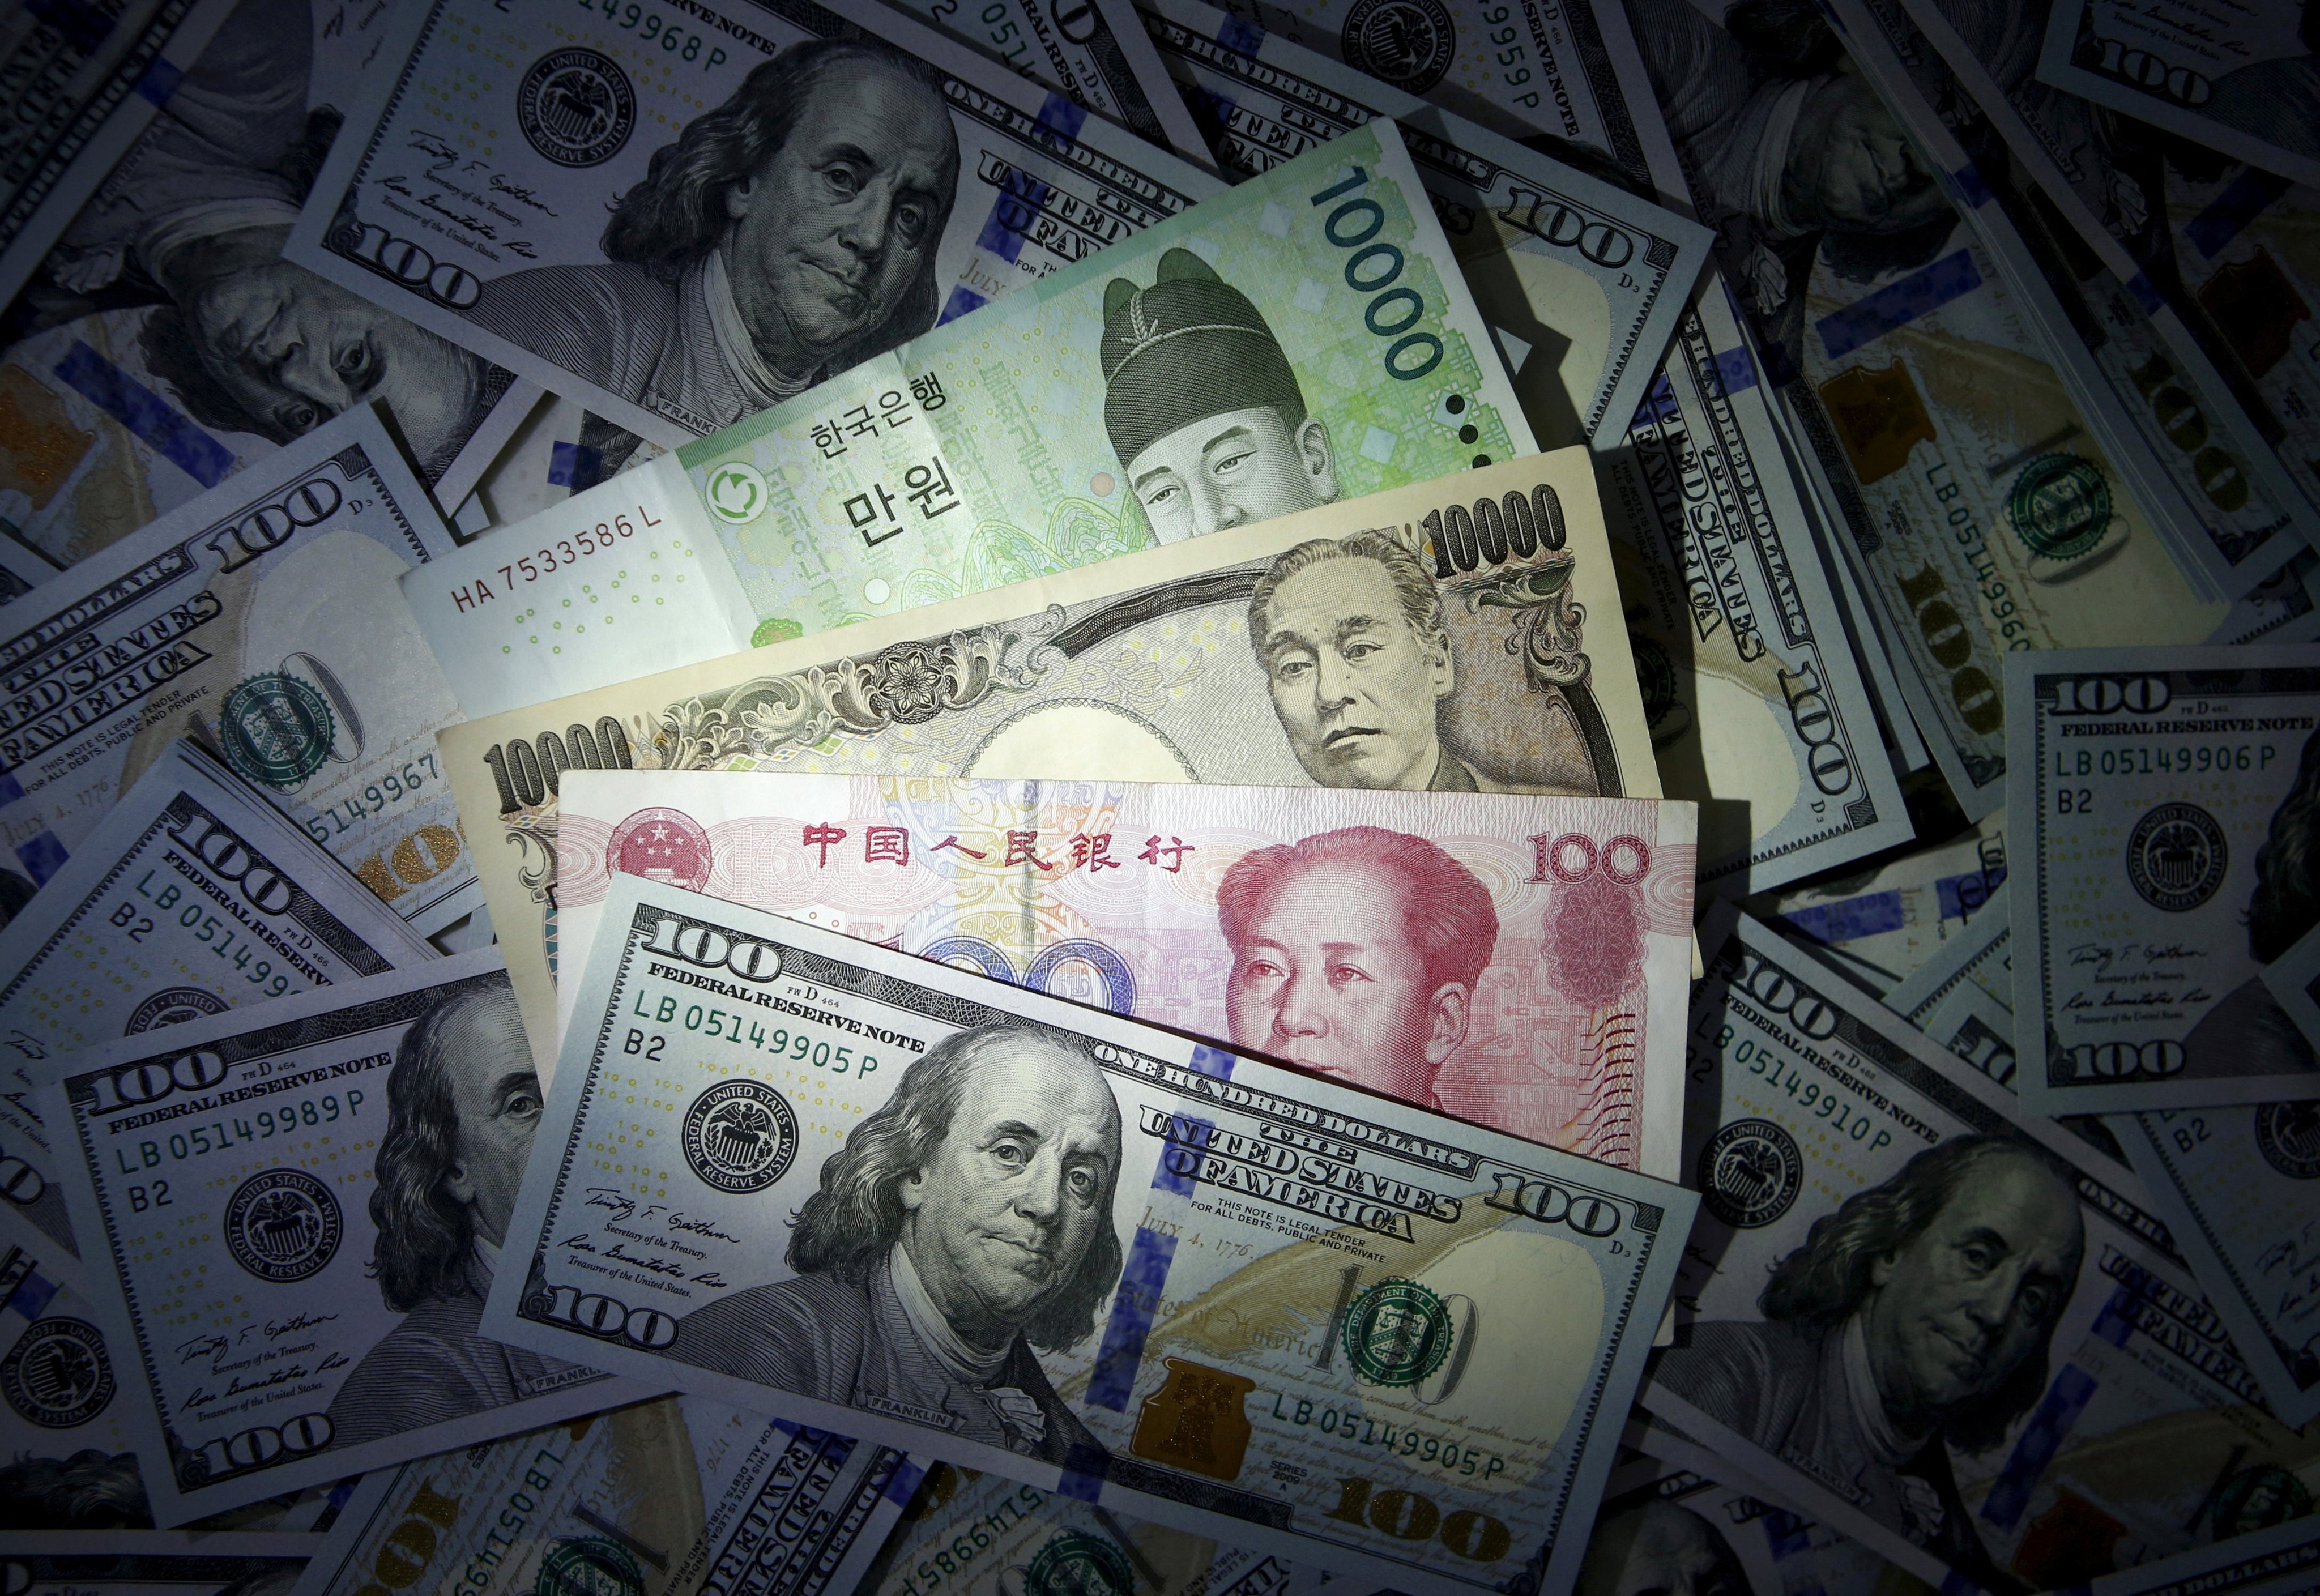 China has made several recent efforts to promote the yuan and encourage other economies to move away from the US dollar, but large-scale global de-dollarisation does not appear to be happening. Photo: Reuters